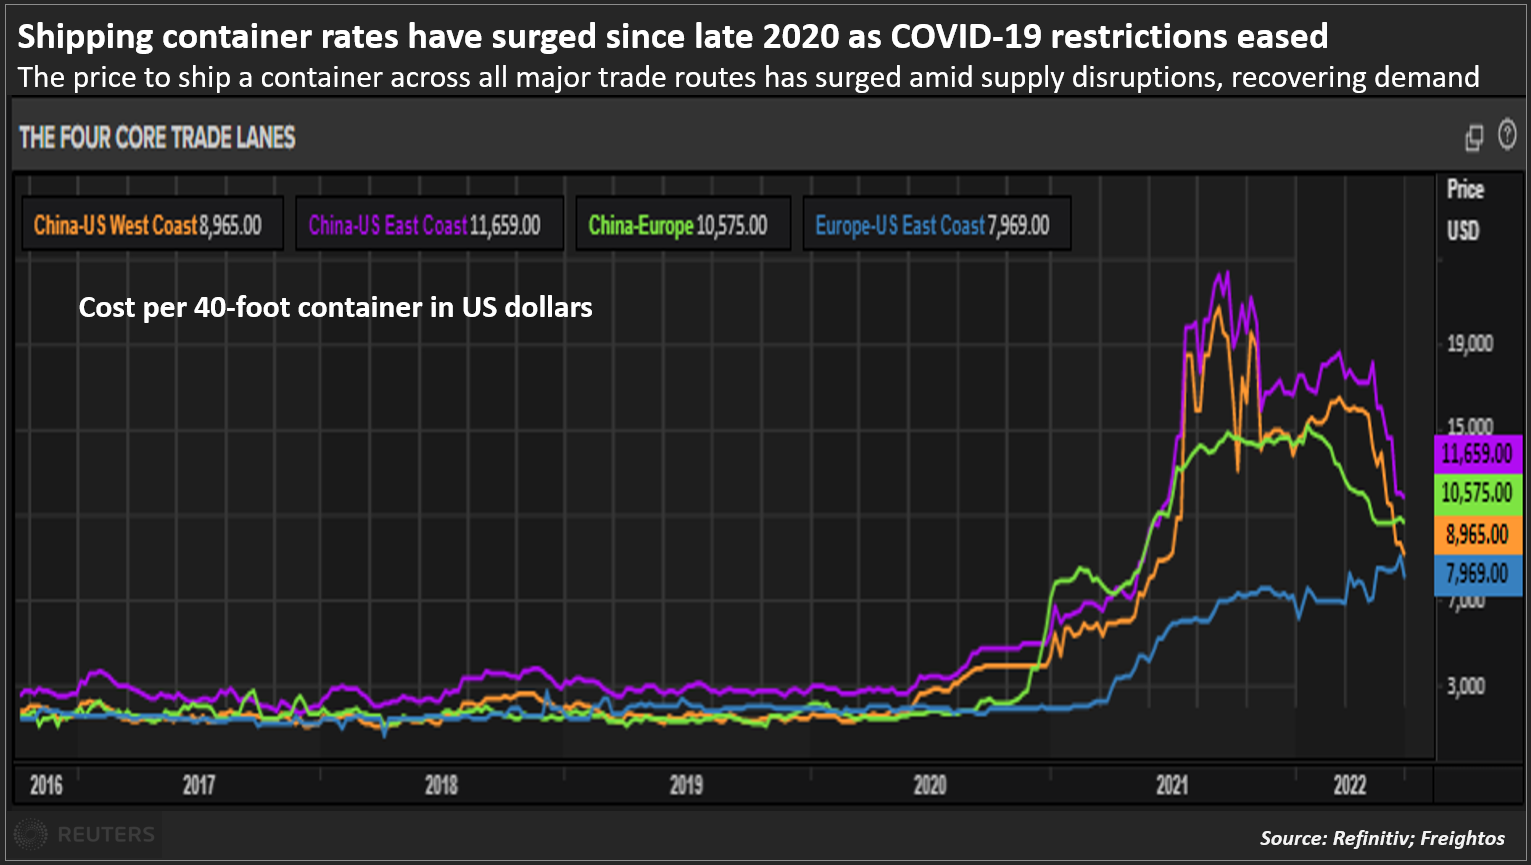 Shipping container rates have surged since late 2020 as COVID-19 restrictions eased